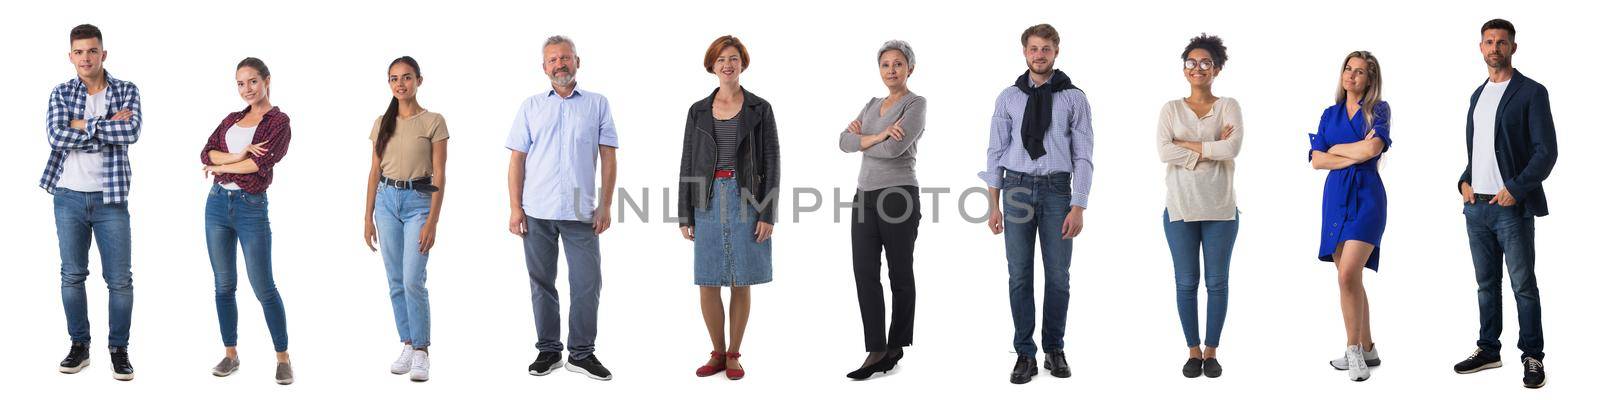 Collection of full length portrait of people in casual clothes isolated on white background